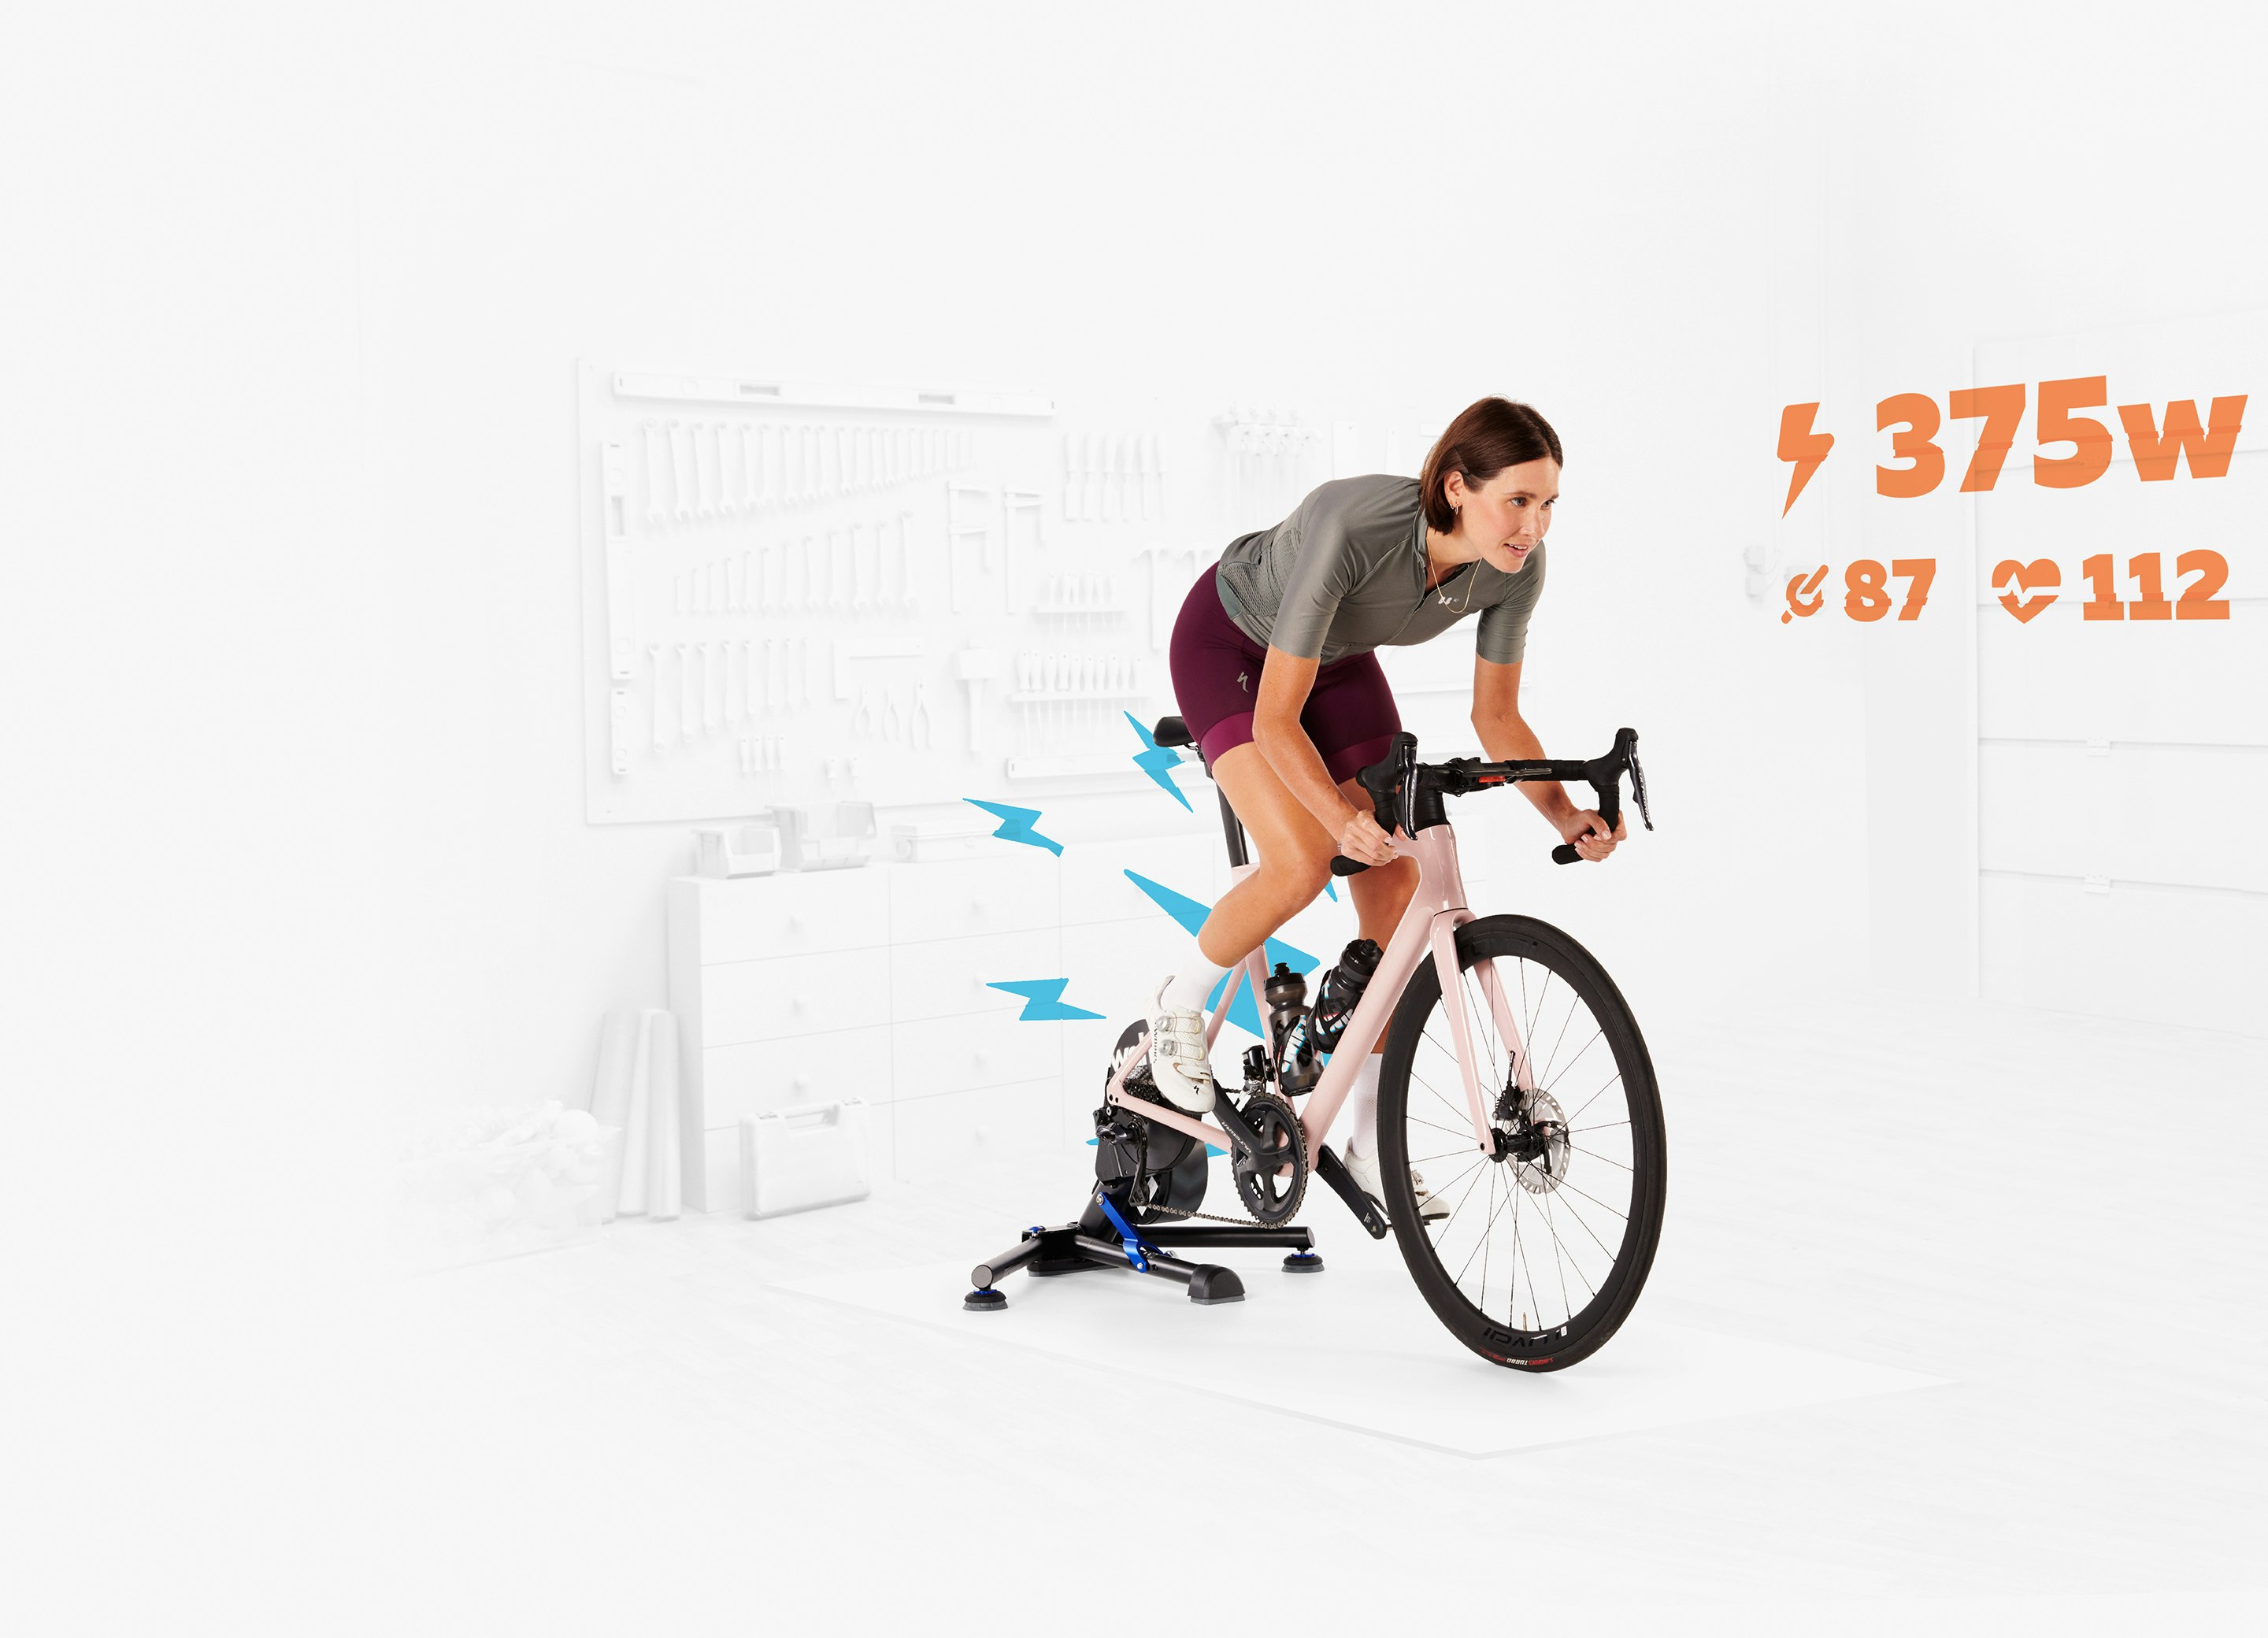 The at Home Cycling and Running Virtual Training App